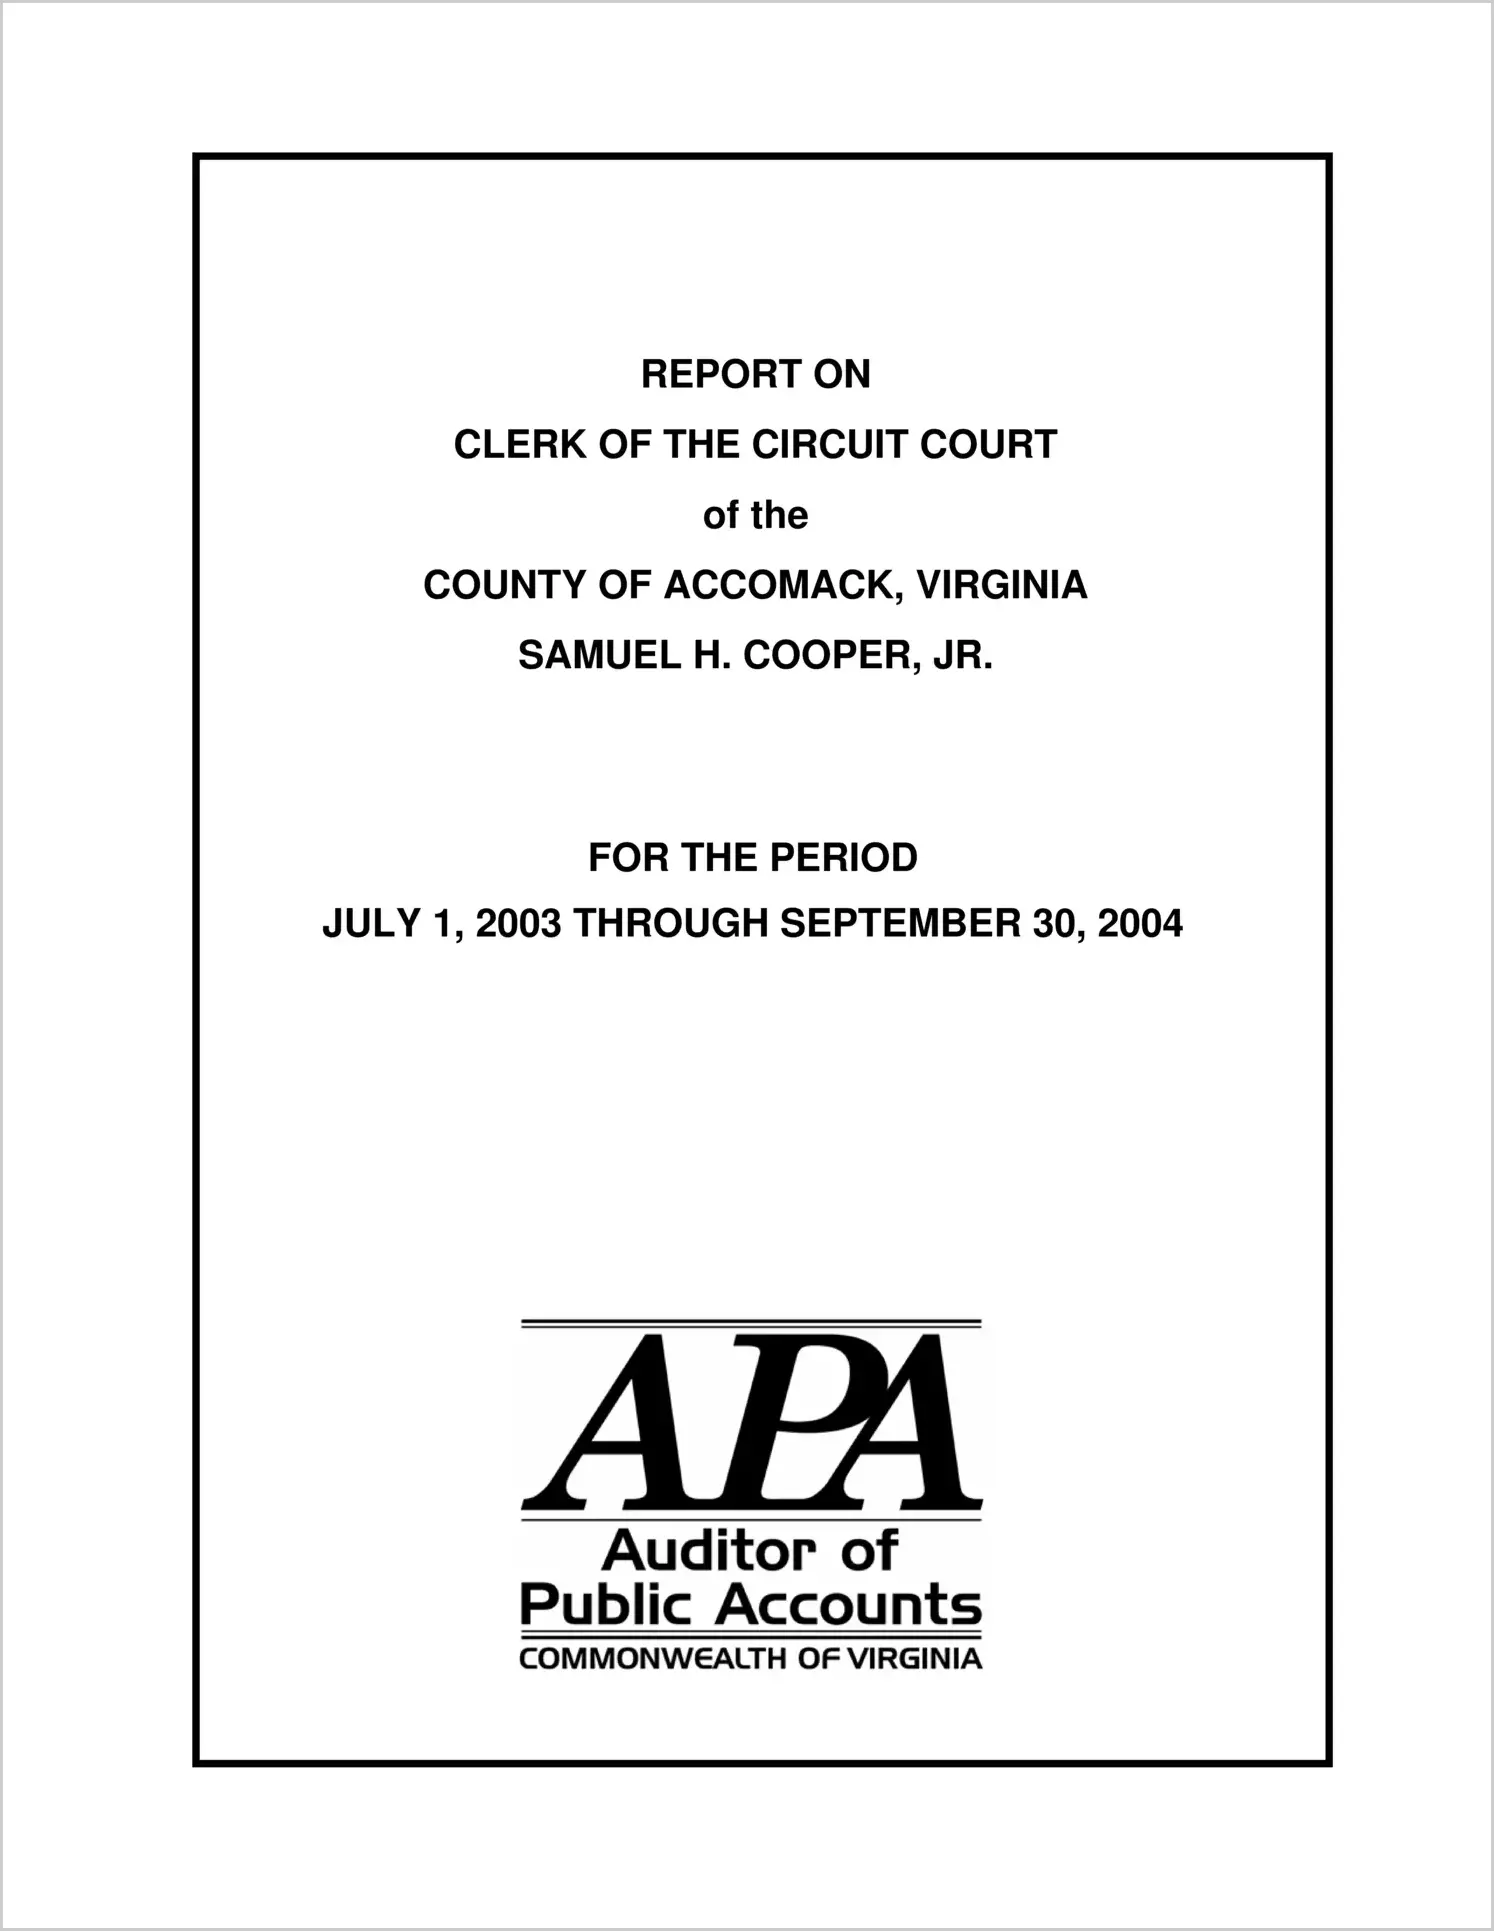 Clerk of the Circuit Court for the County of Accomack for 2004